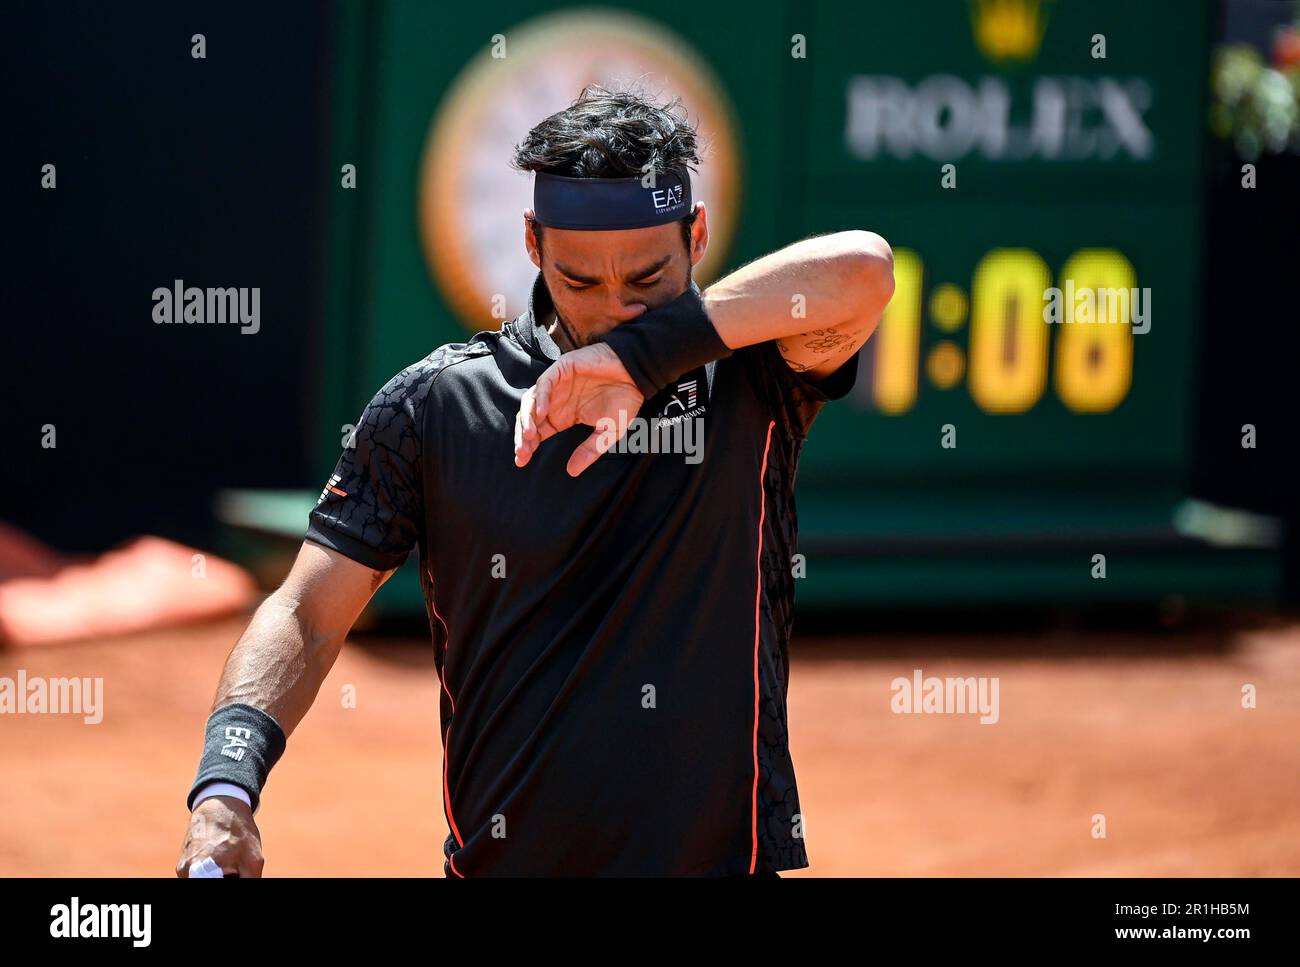 May 14, 2023, Rome Fabio Fognini of Italy reacts during his mens singles second round match against Holger Rune of Denmark (not pictured) at the Italian Open tennis tournament in Rome, Italy,